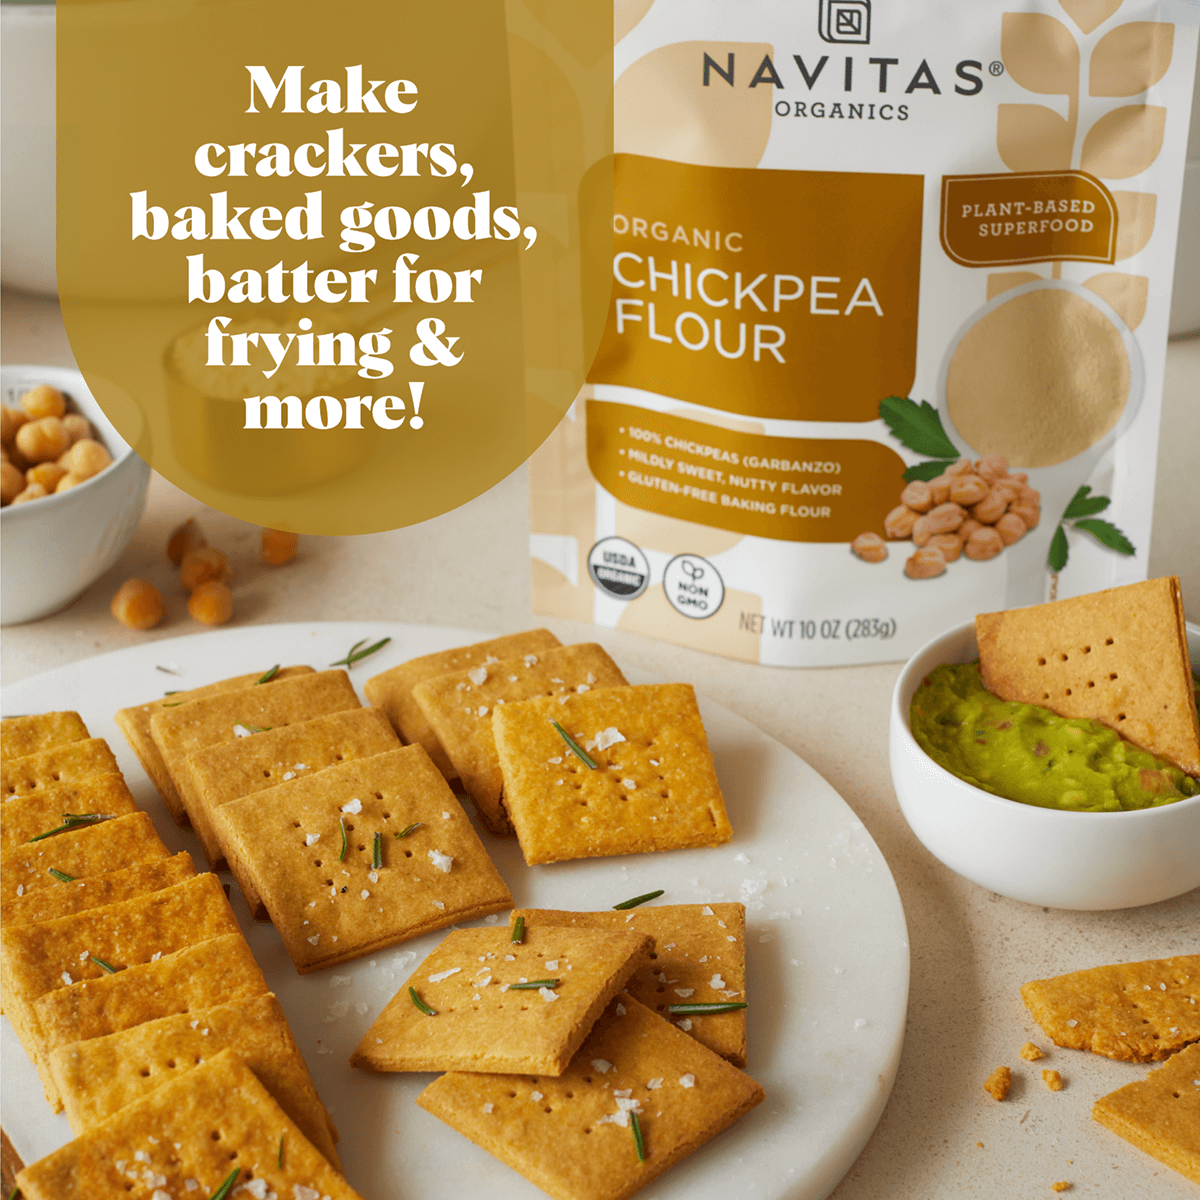 Navitas Chickpea Flour makes crackers, baked goods, batter for frying & more! Plate of homemade chickpea crackers with a bowl of guacamole and fresh chickpeas on a counter.